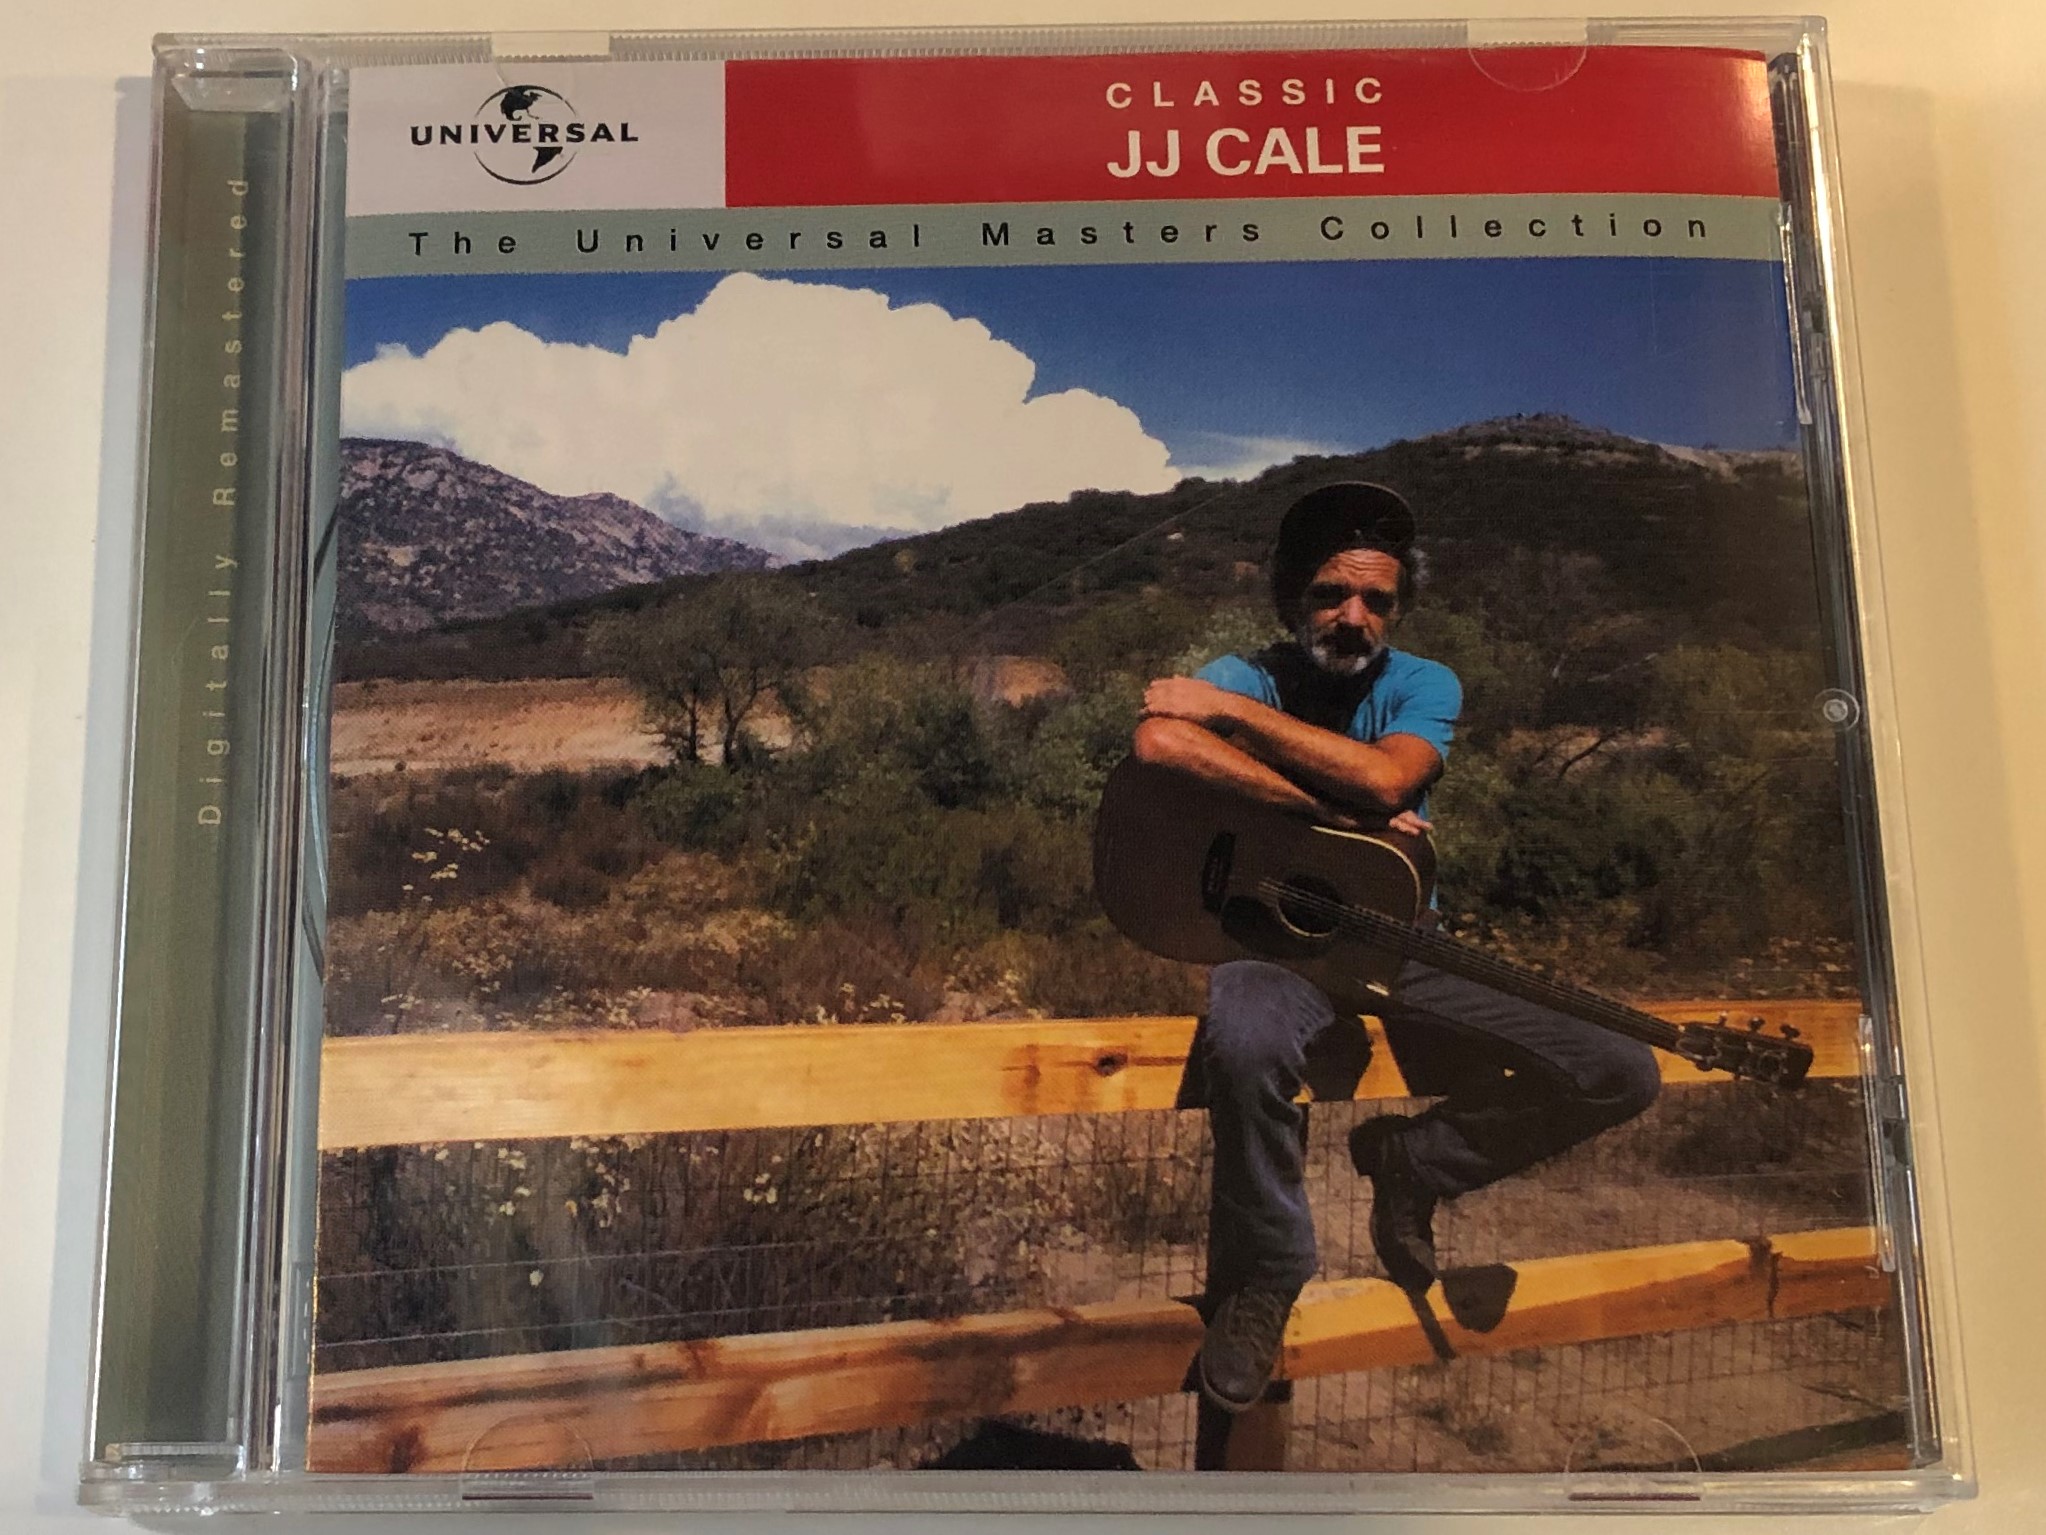 classic-jj-cale-the-universal-masters-collection-mercury-audio-cd-1999-542-227-2-1-.jpg